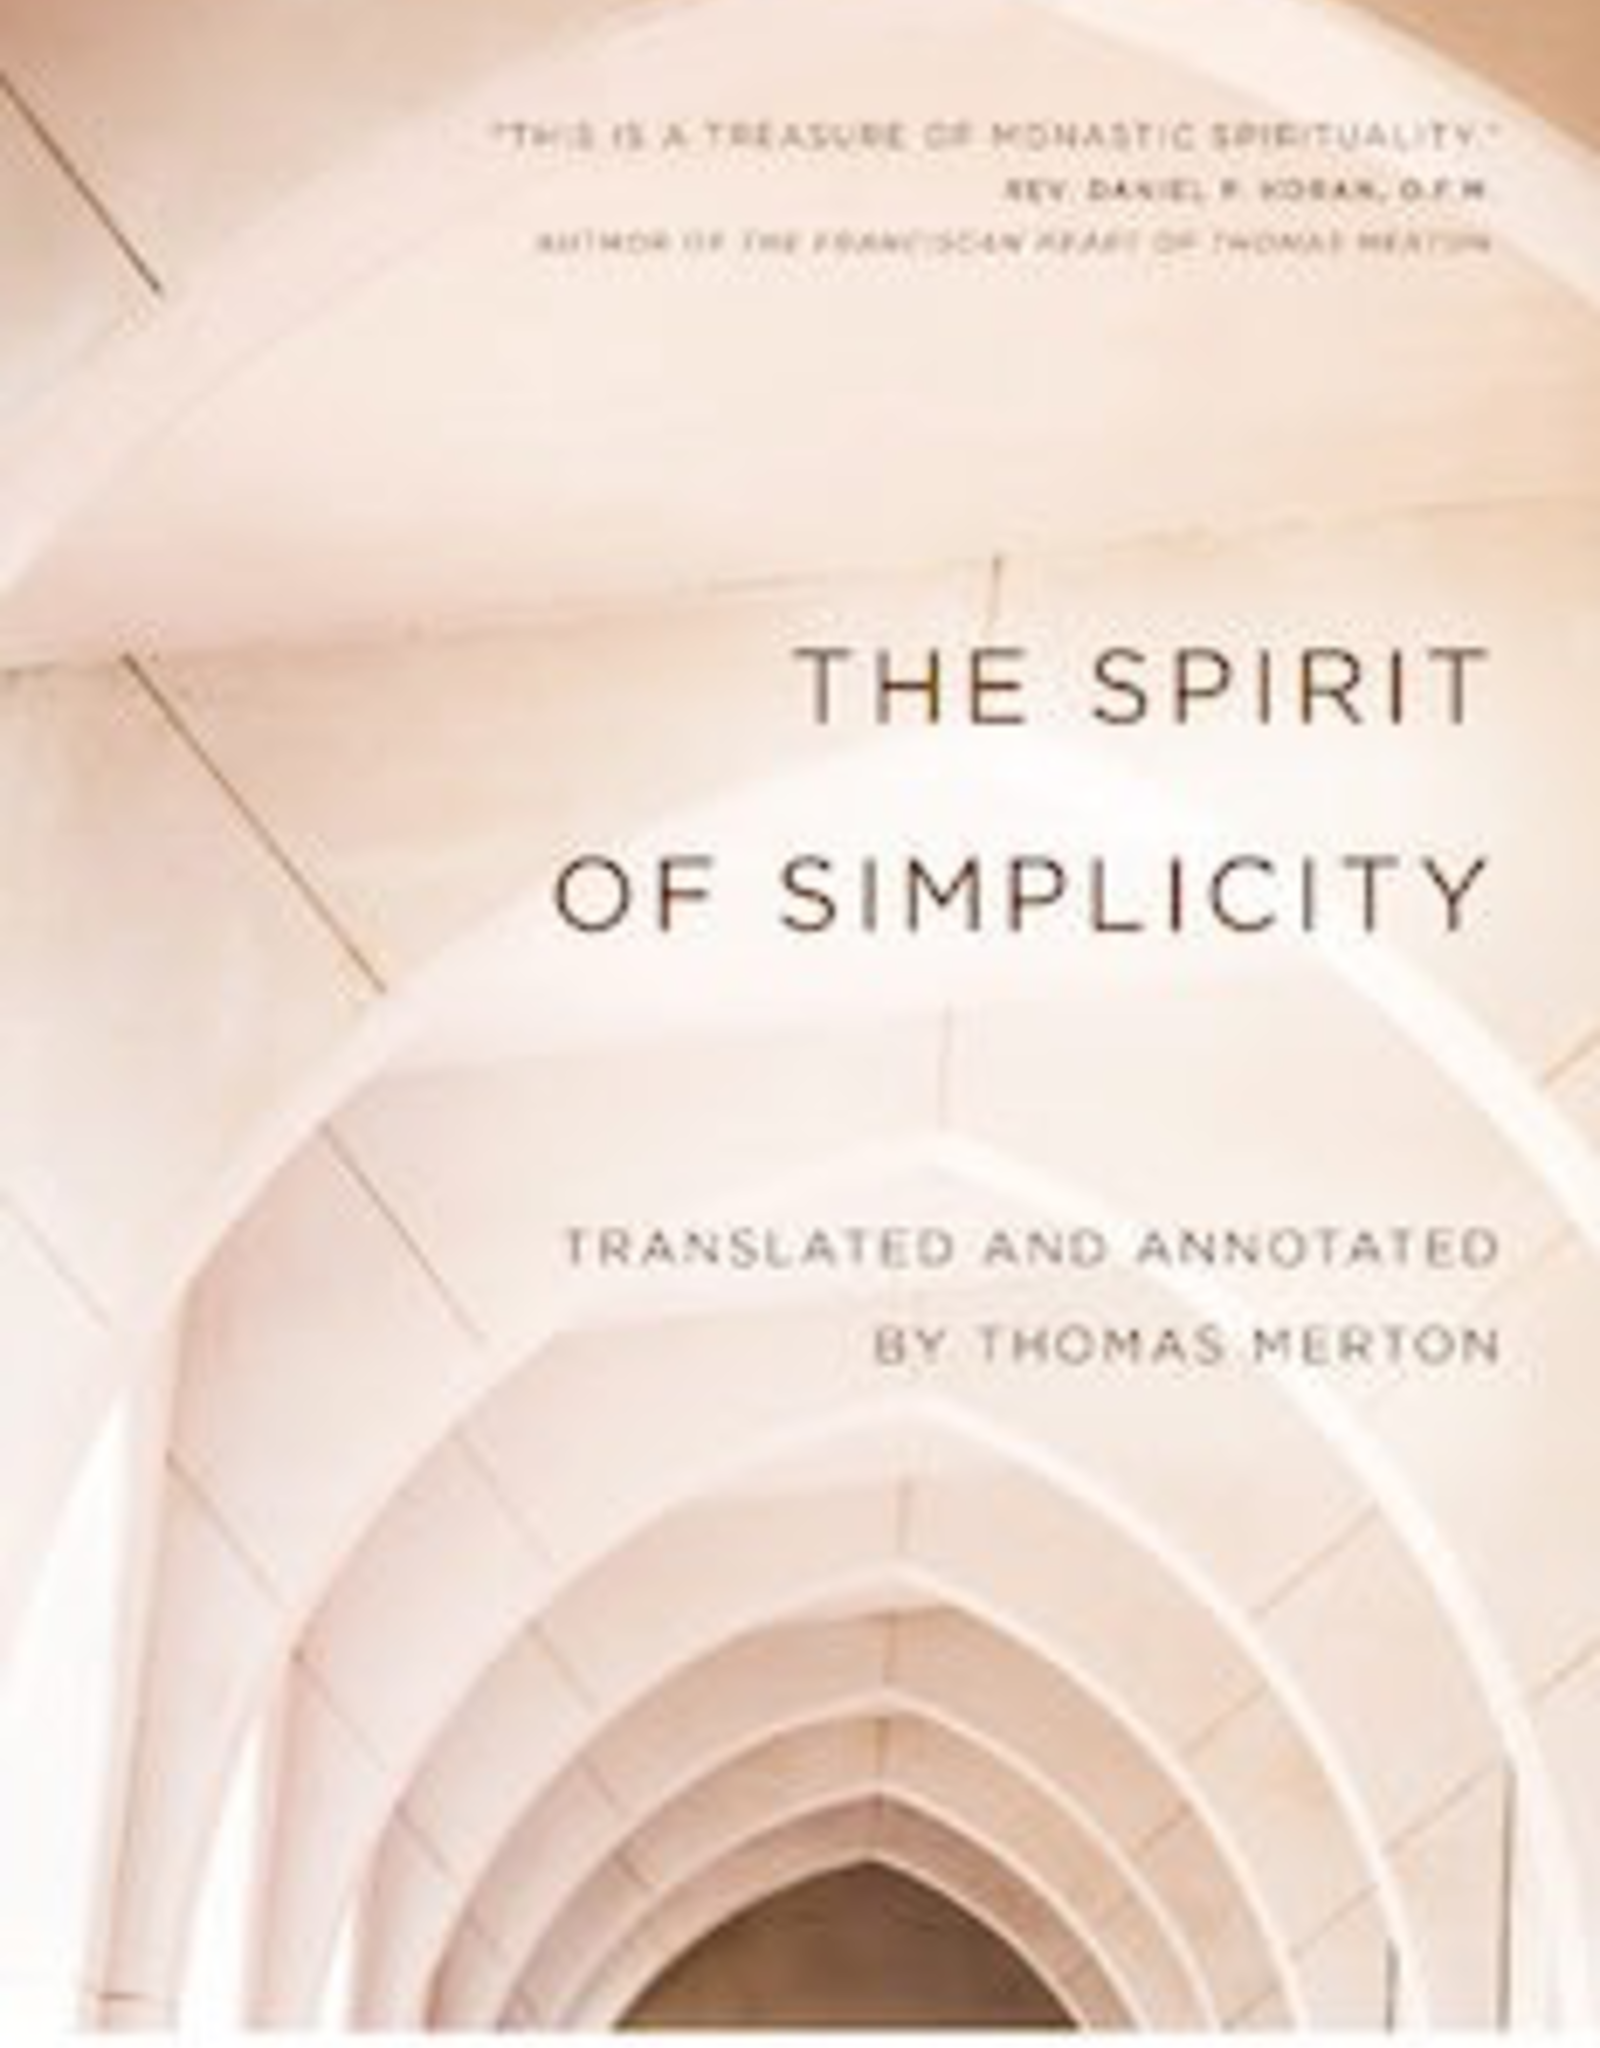 Ave Maria Press The Spirit of Simplicity, by Jean Baptiste Chautard and Thomas Merton (paperback)